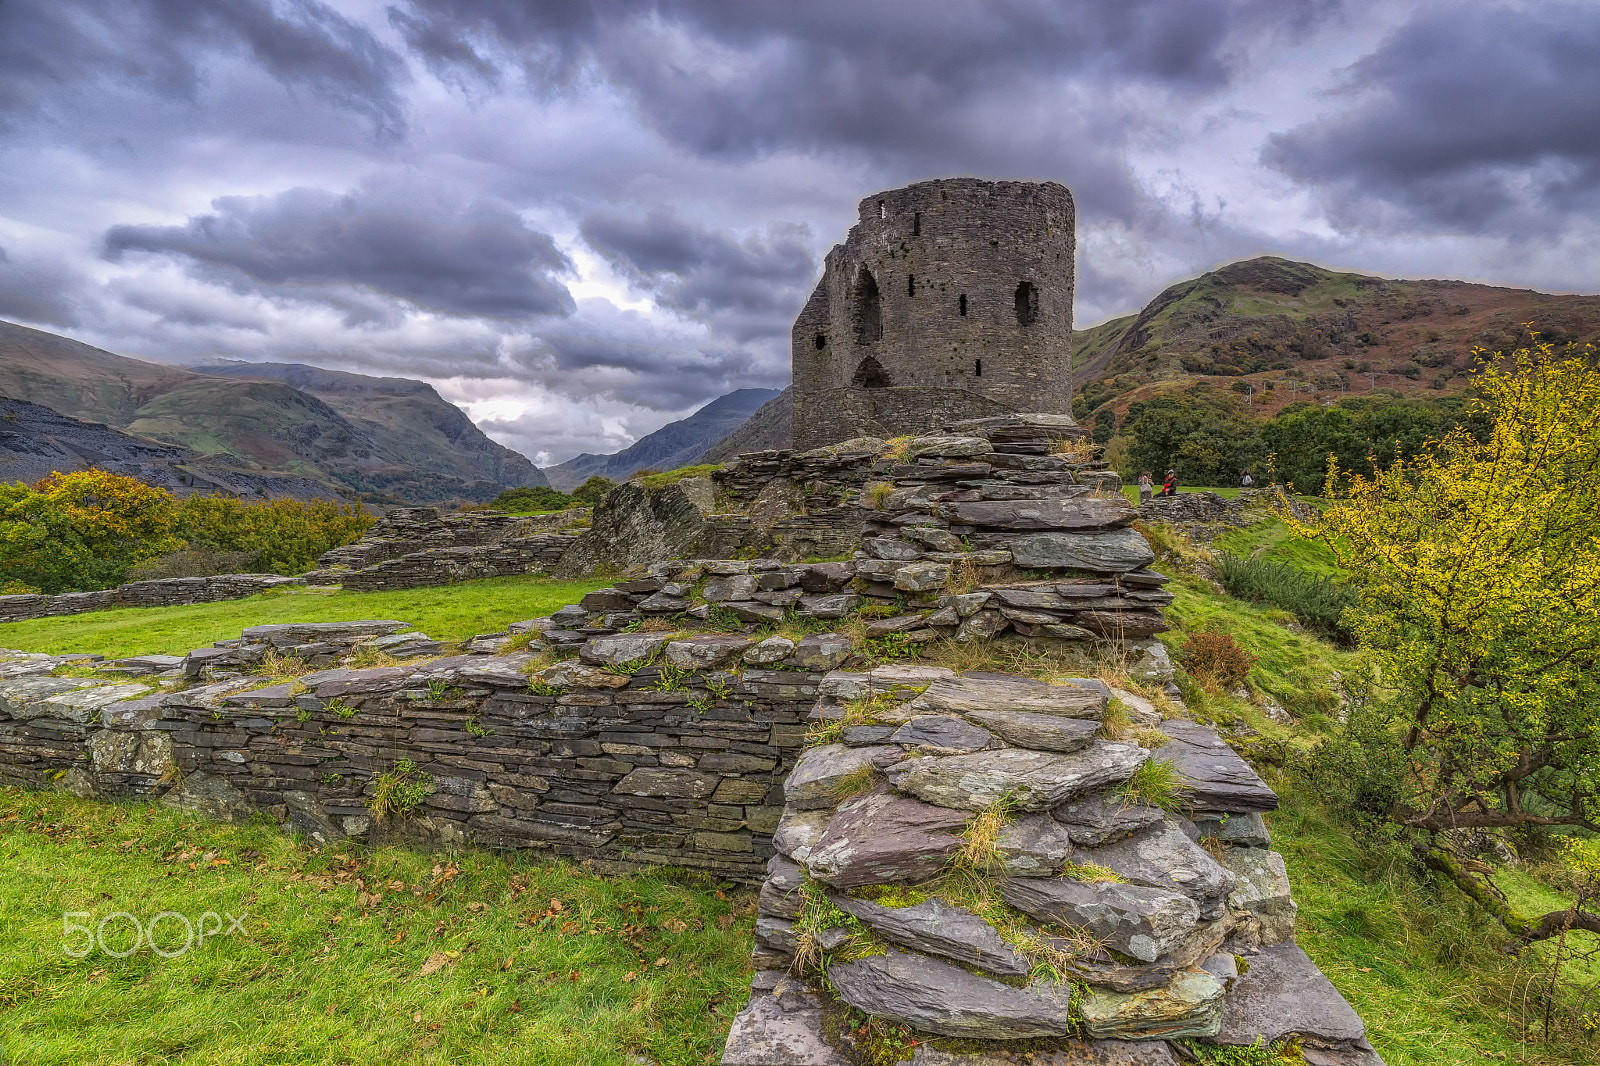 ZEISS Touit 12mm F2.8 sample photo. Dolbadarn castle photography